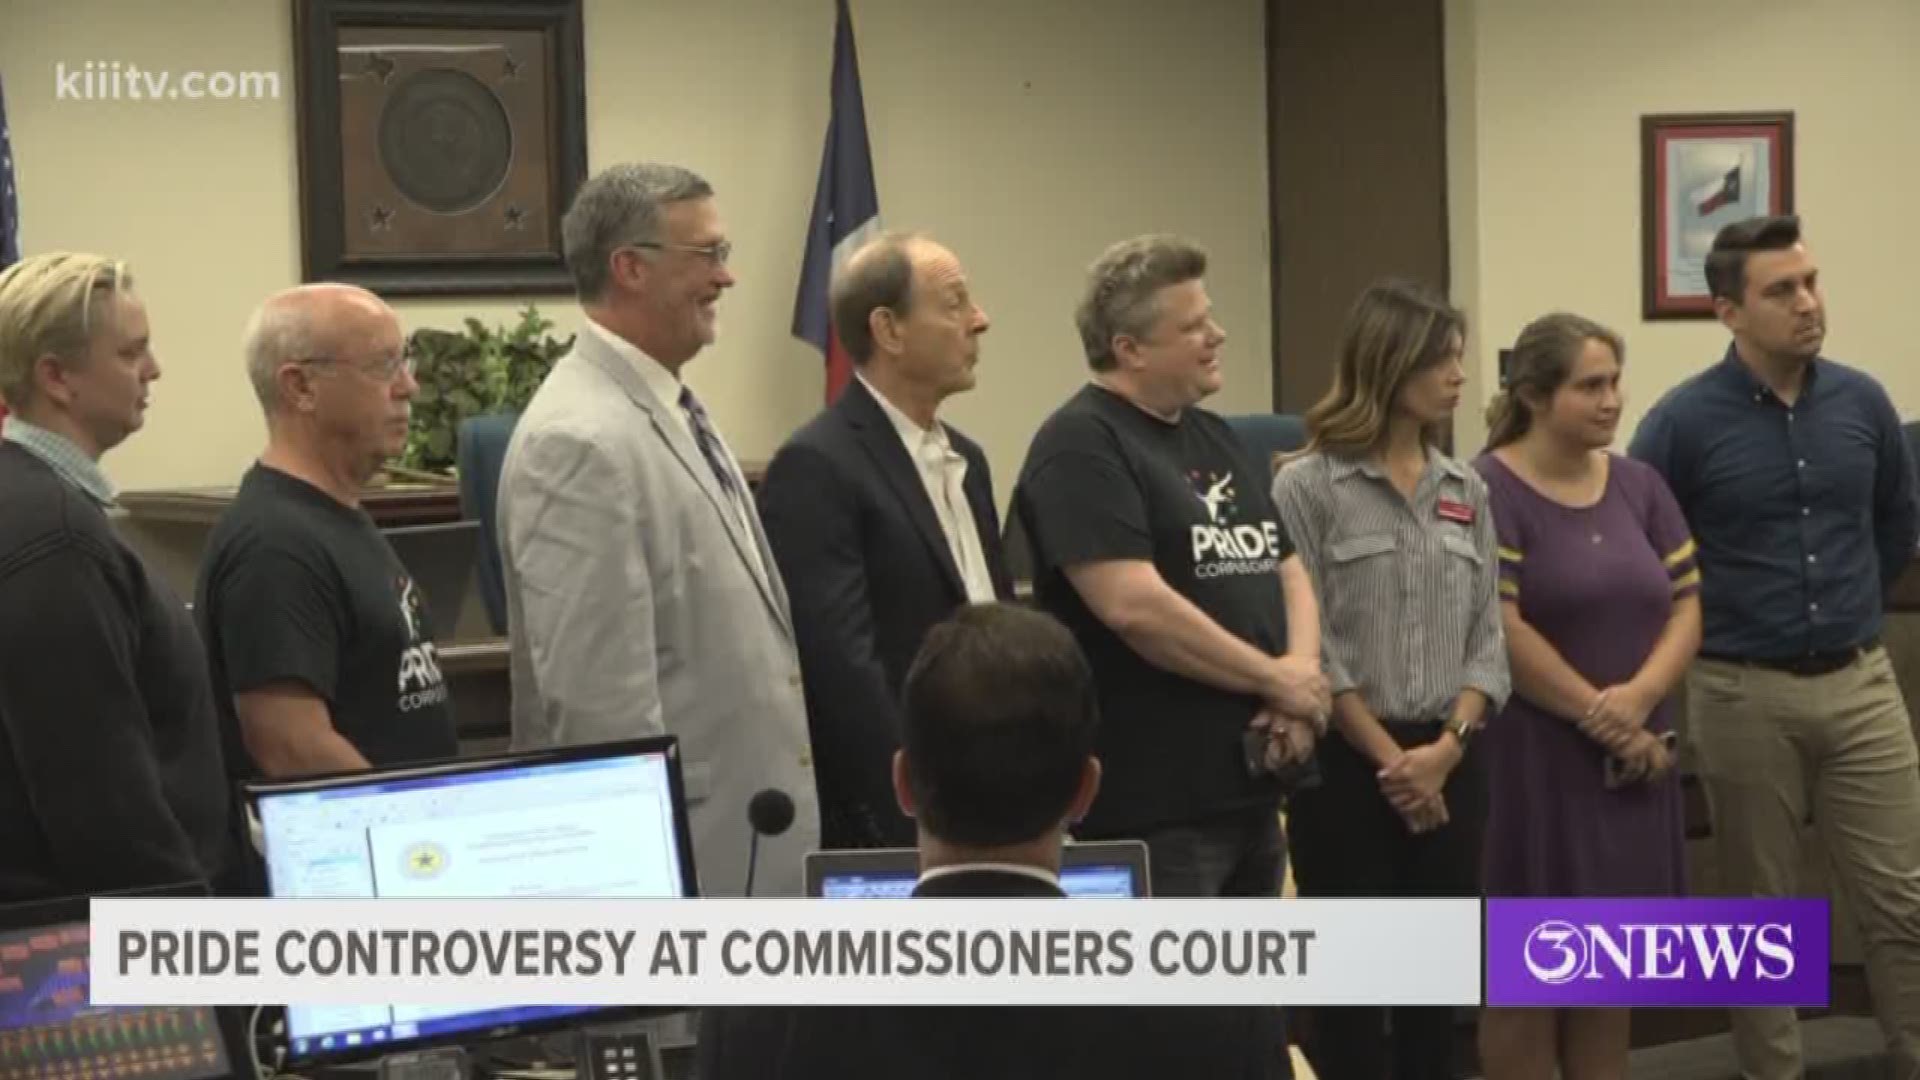 Nueces County Judge Barbara Canales read a proclamation during Wednesday's Commissioners Court meeting to recognize Pride Week, but not all of the commissioners were on board.